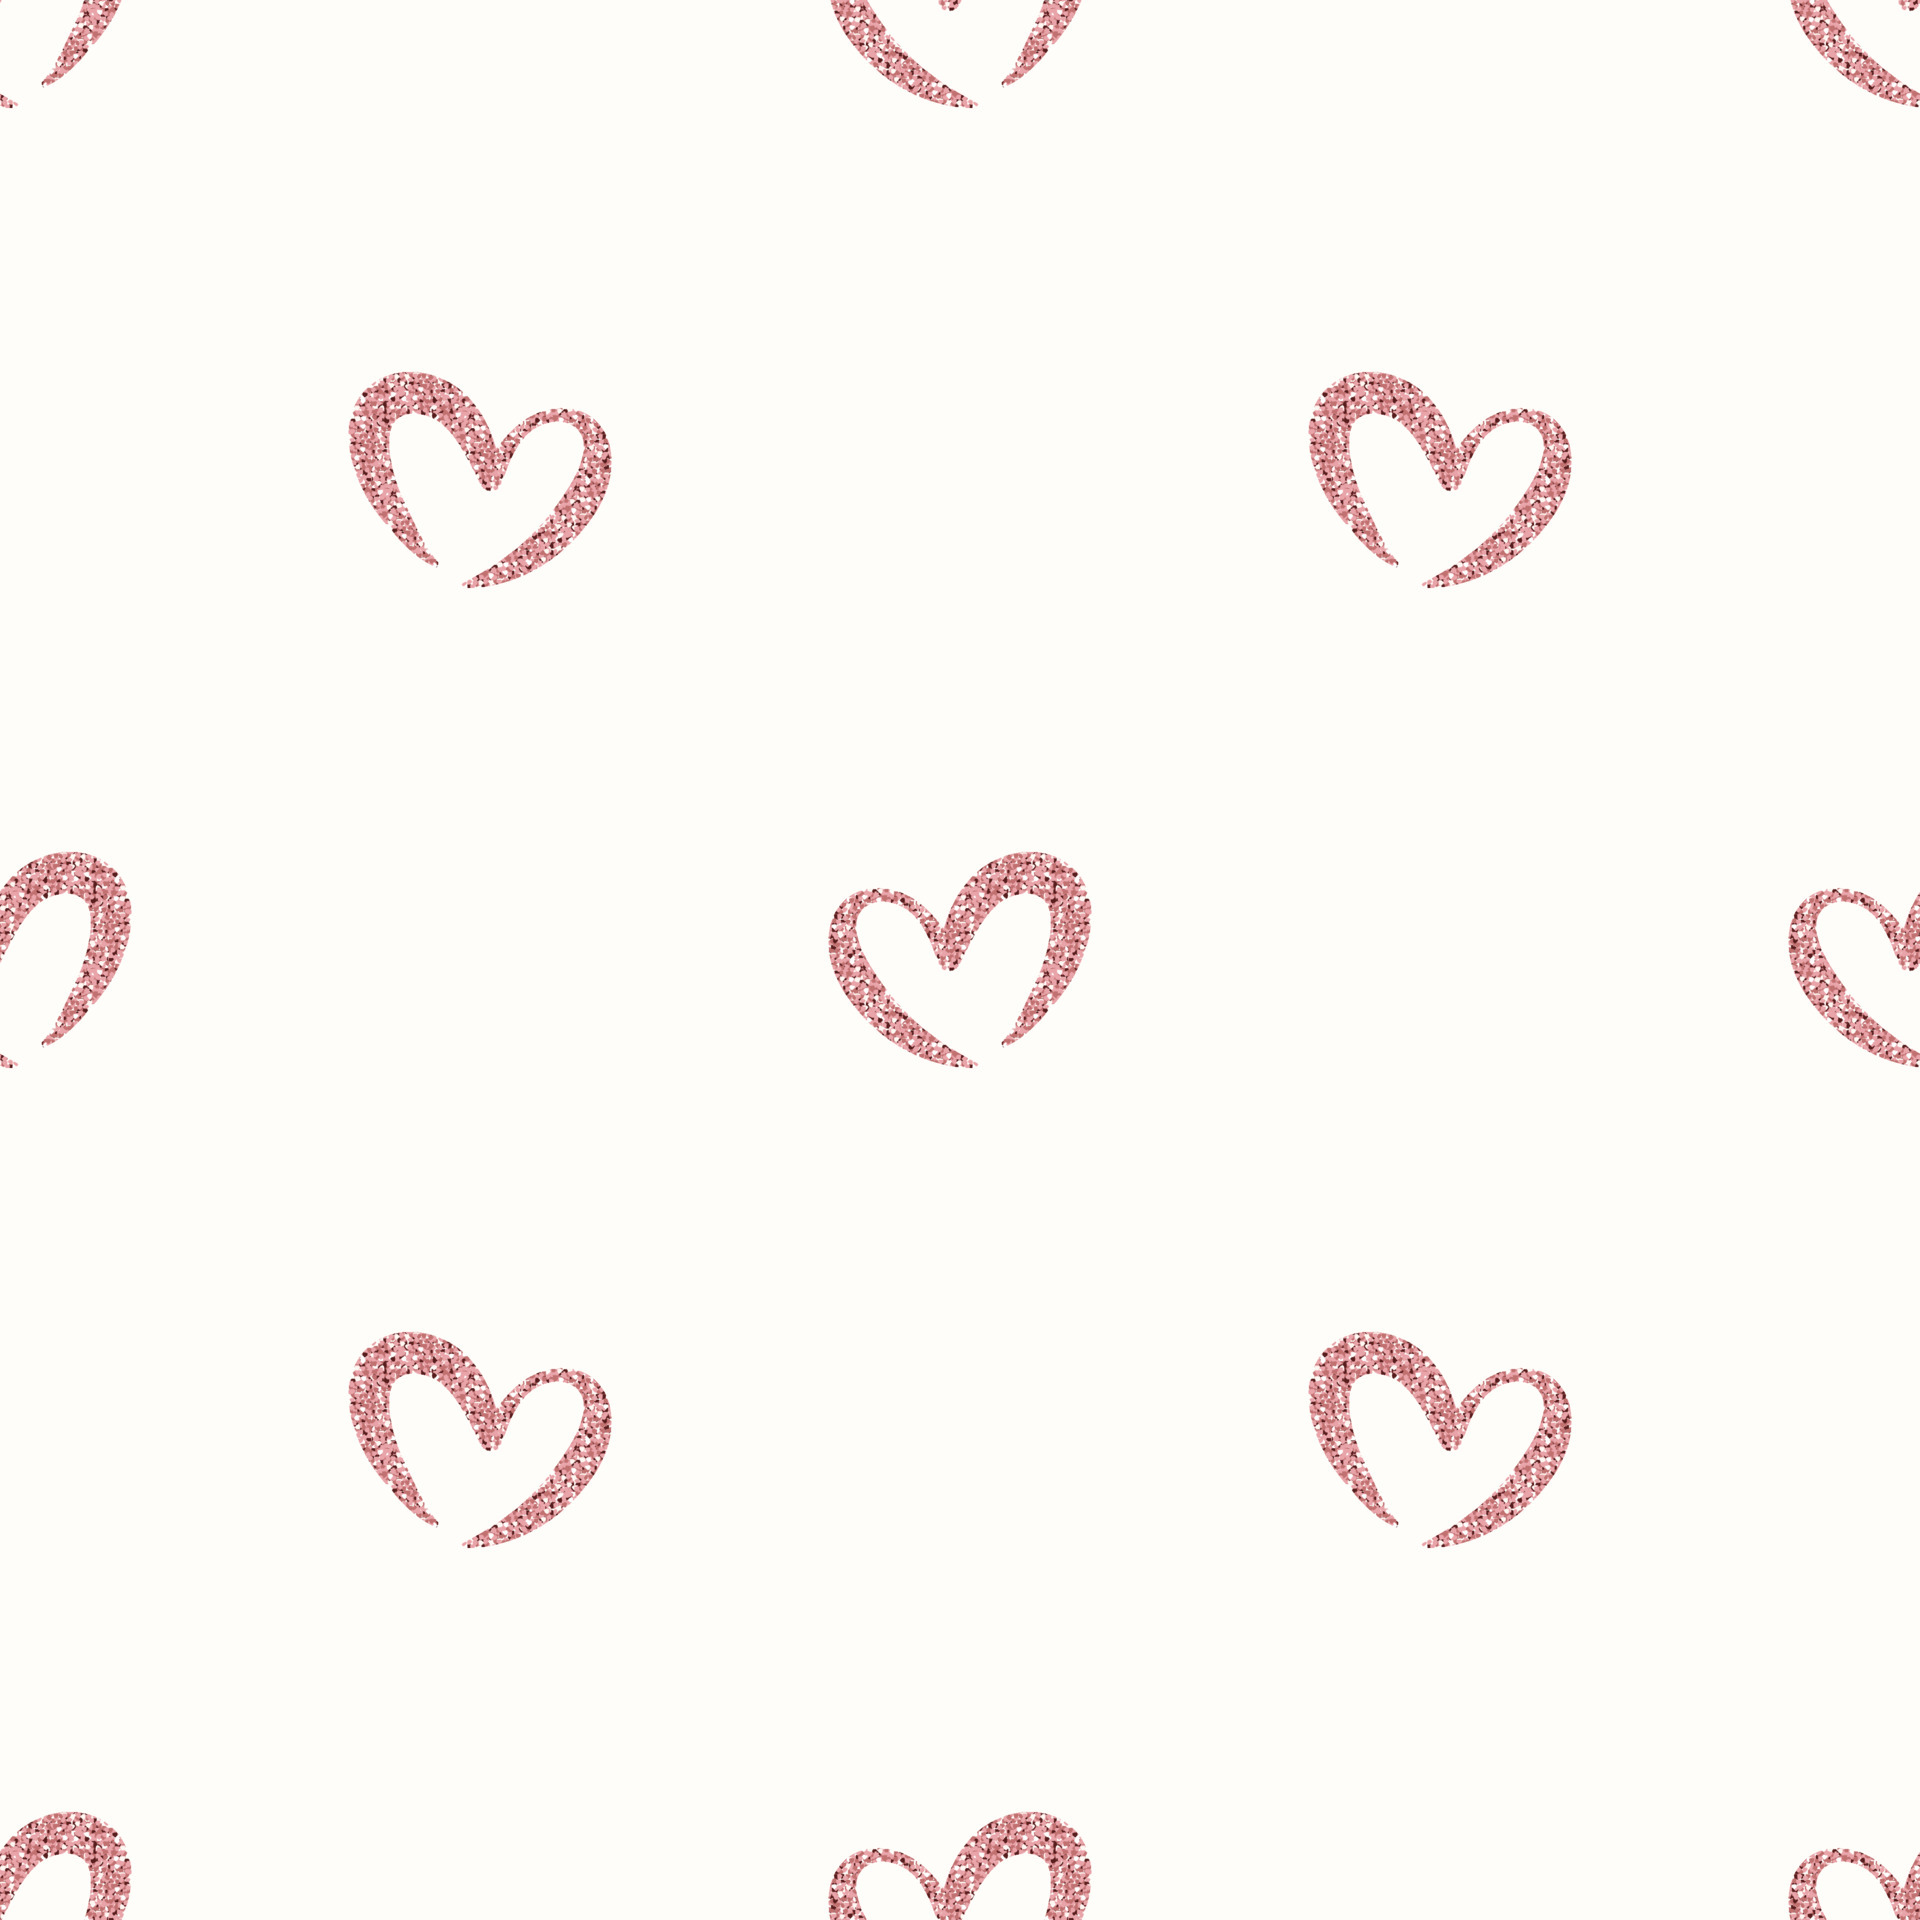 Wallpaper Heart Valentines Day Glitter Pink Red Background  Download  Free Image